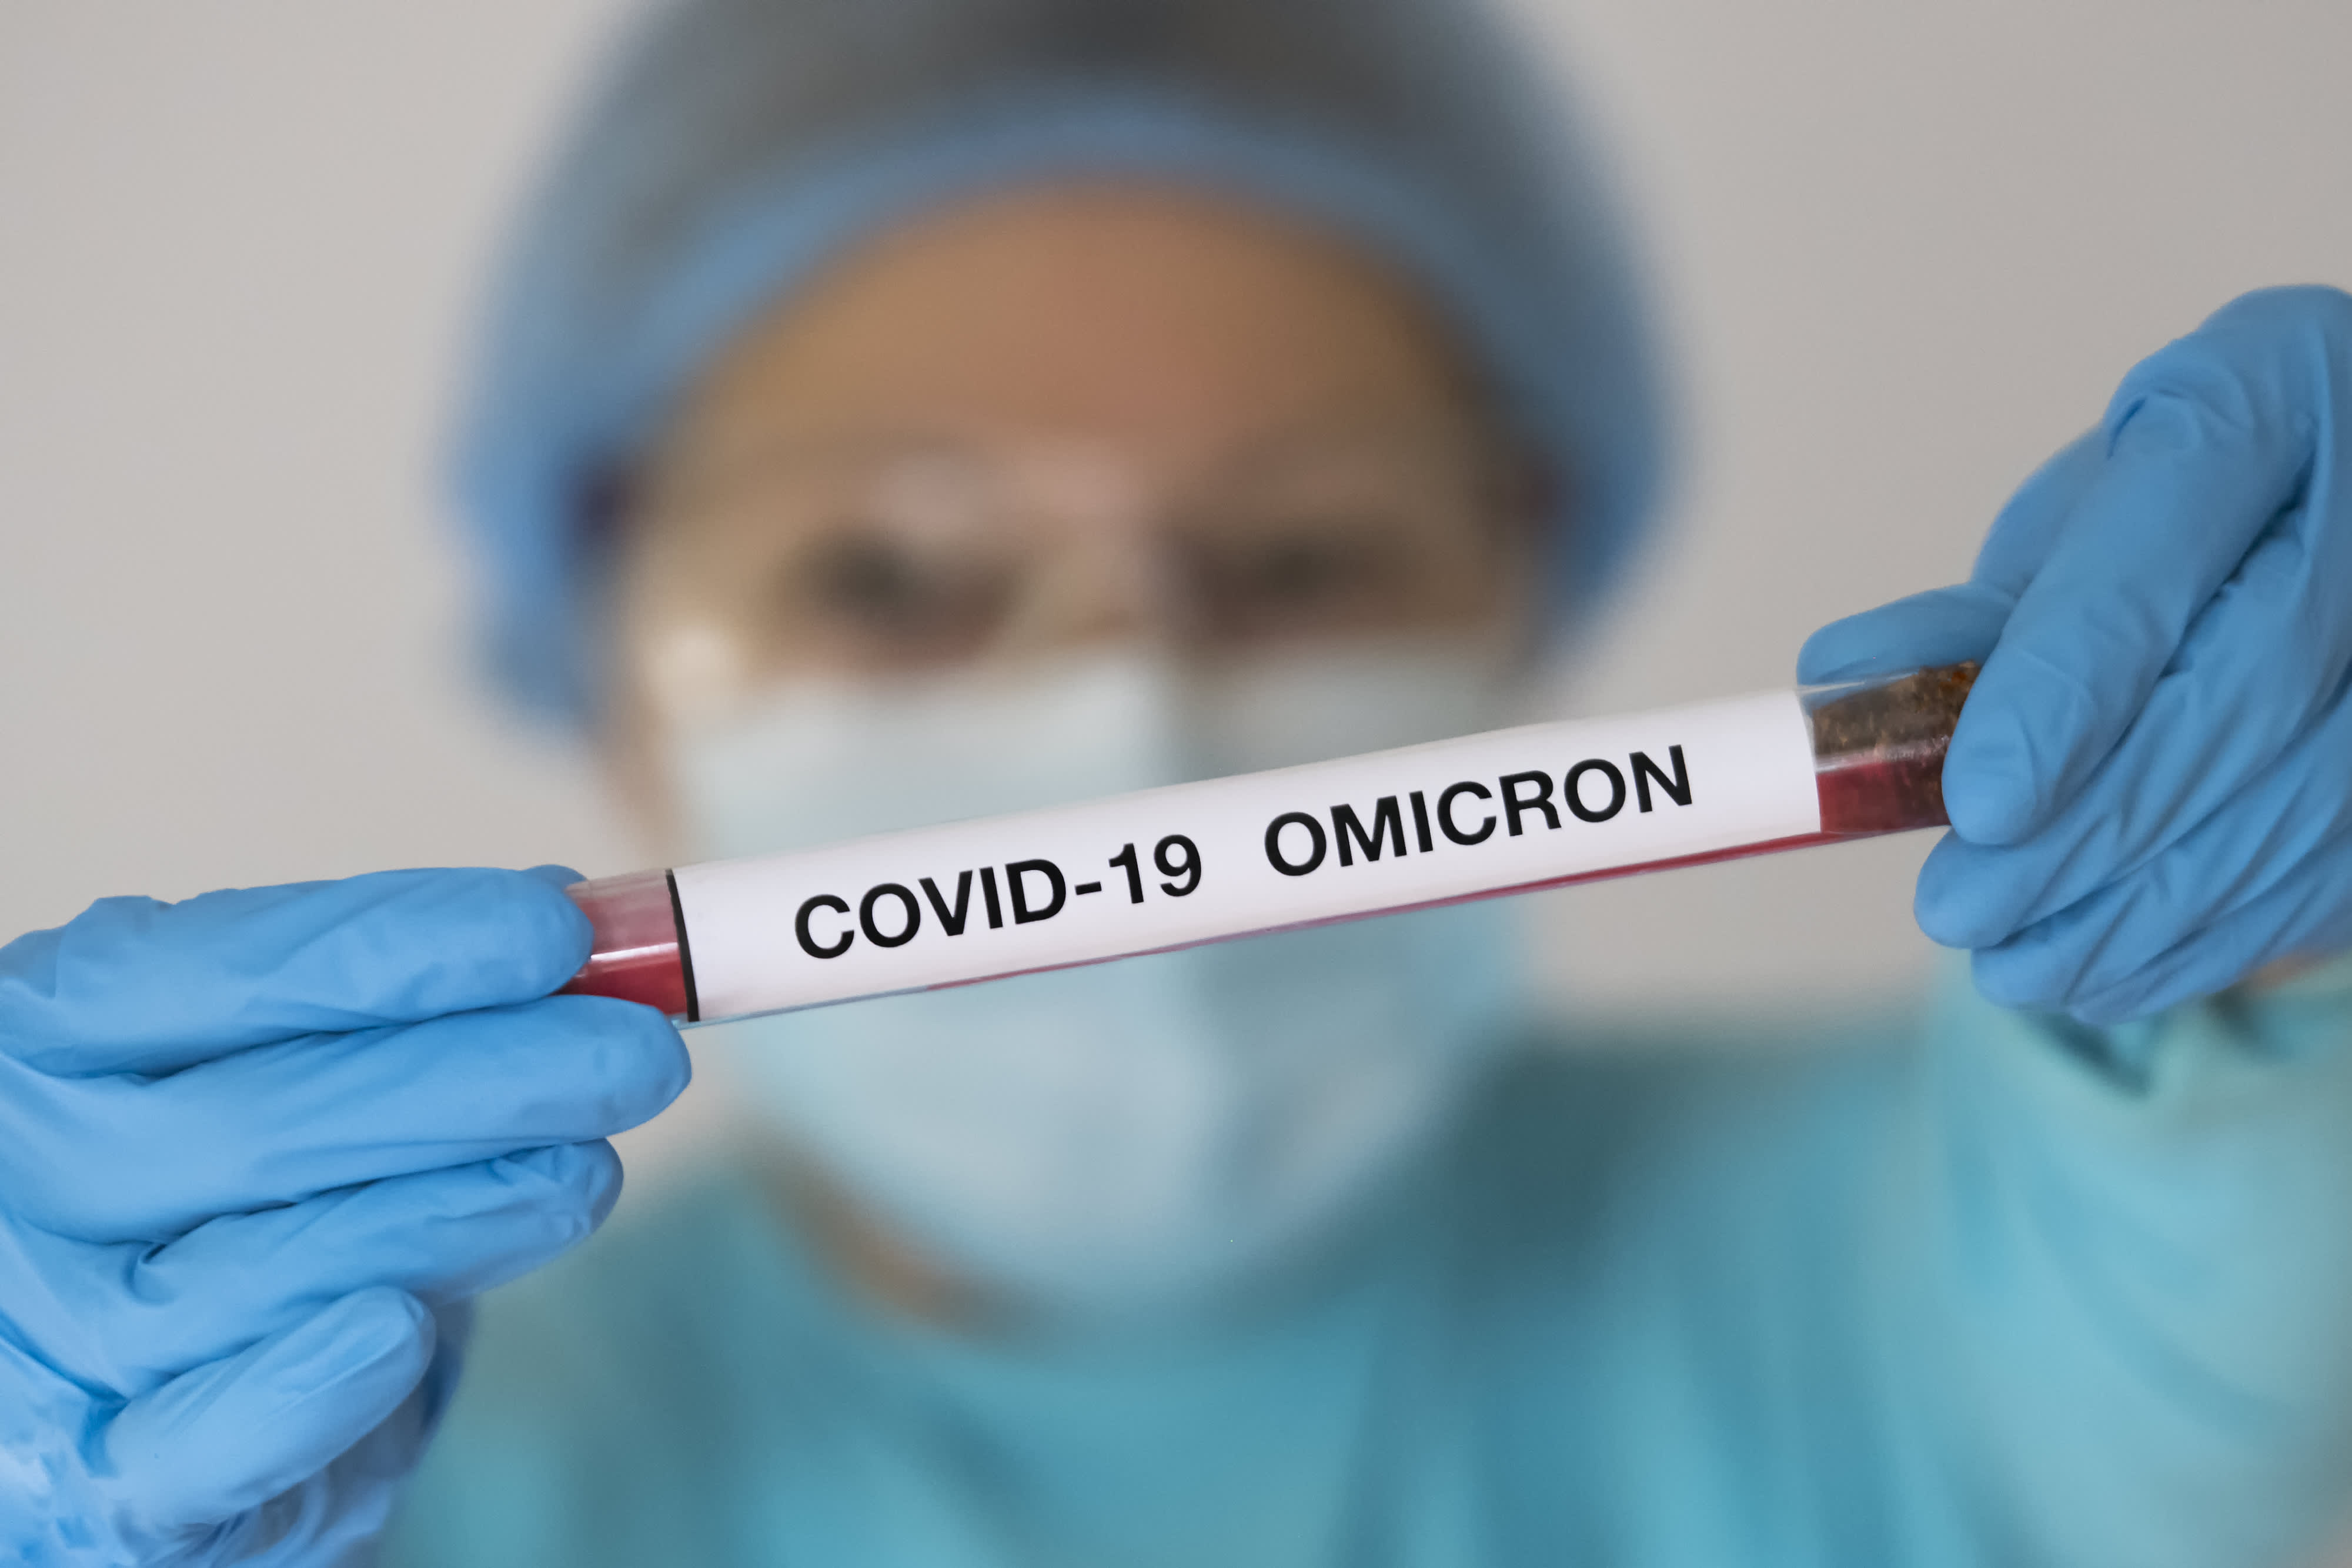 Covid: WHO says South Africa hospitalizations rising, omicron severity unclear